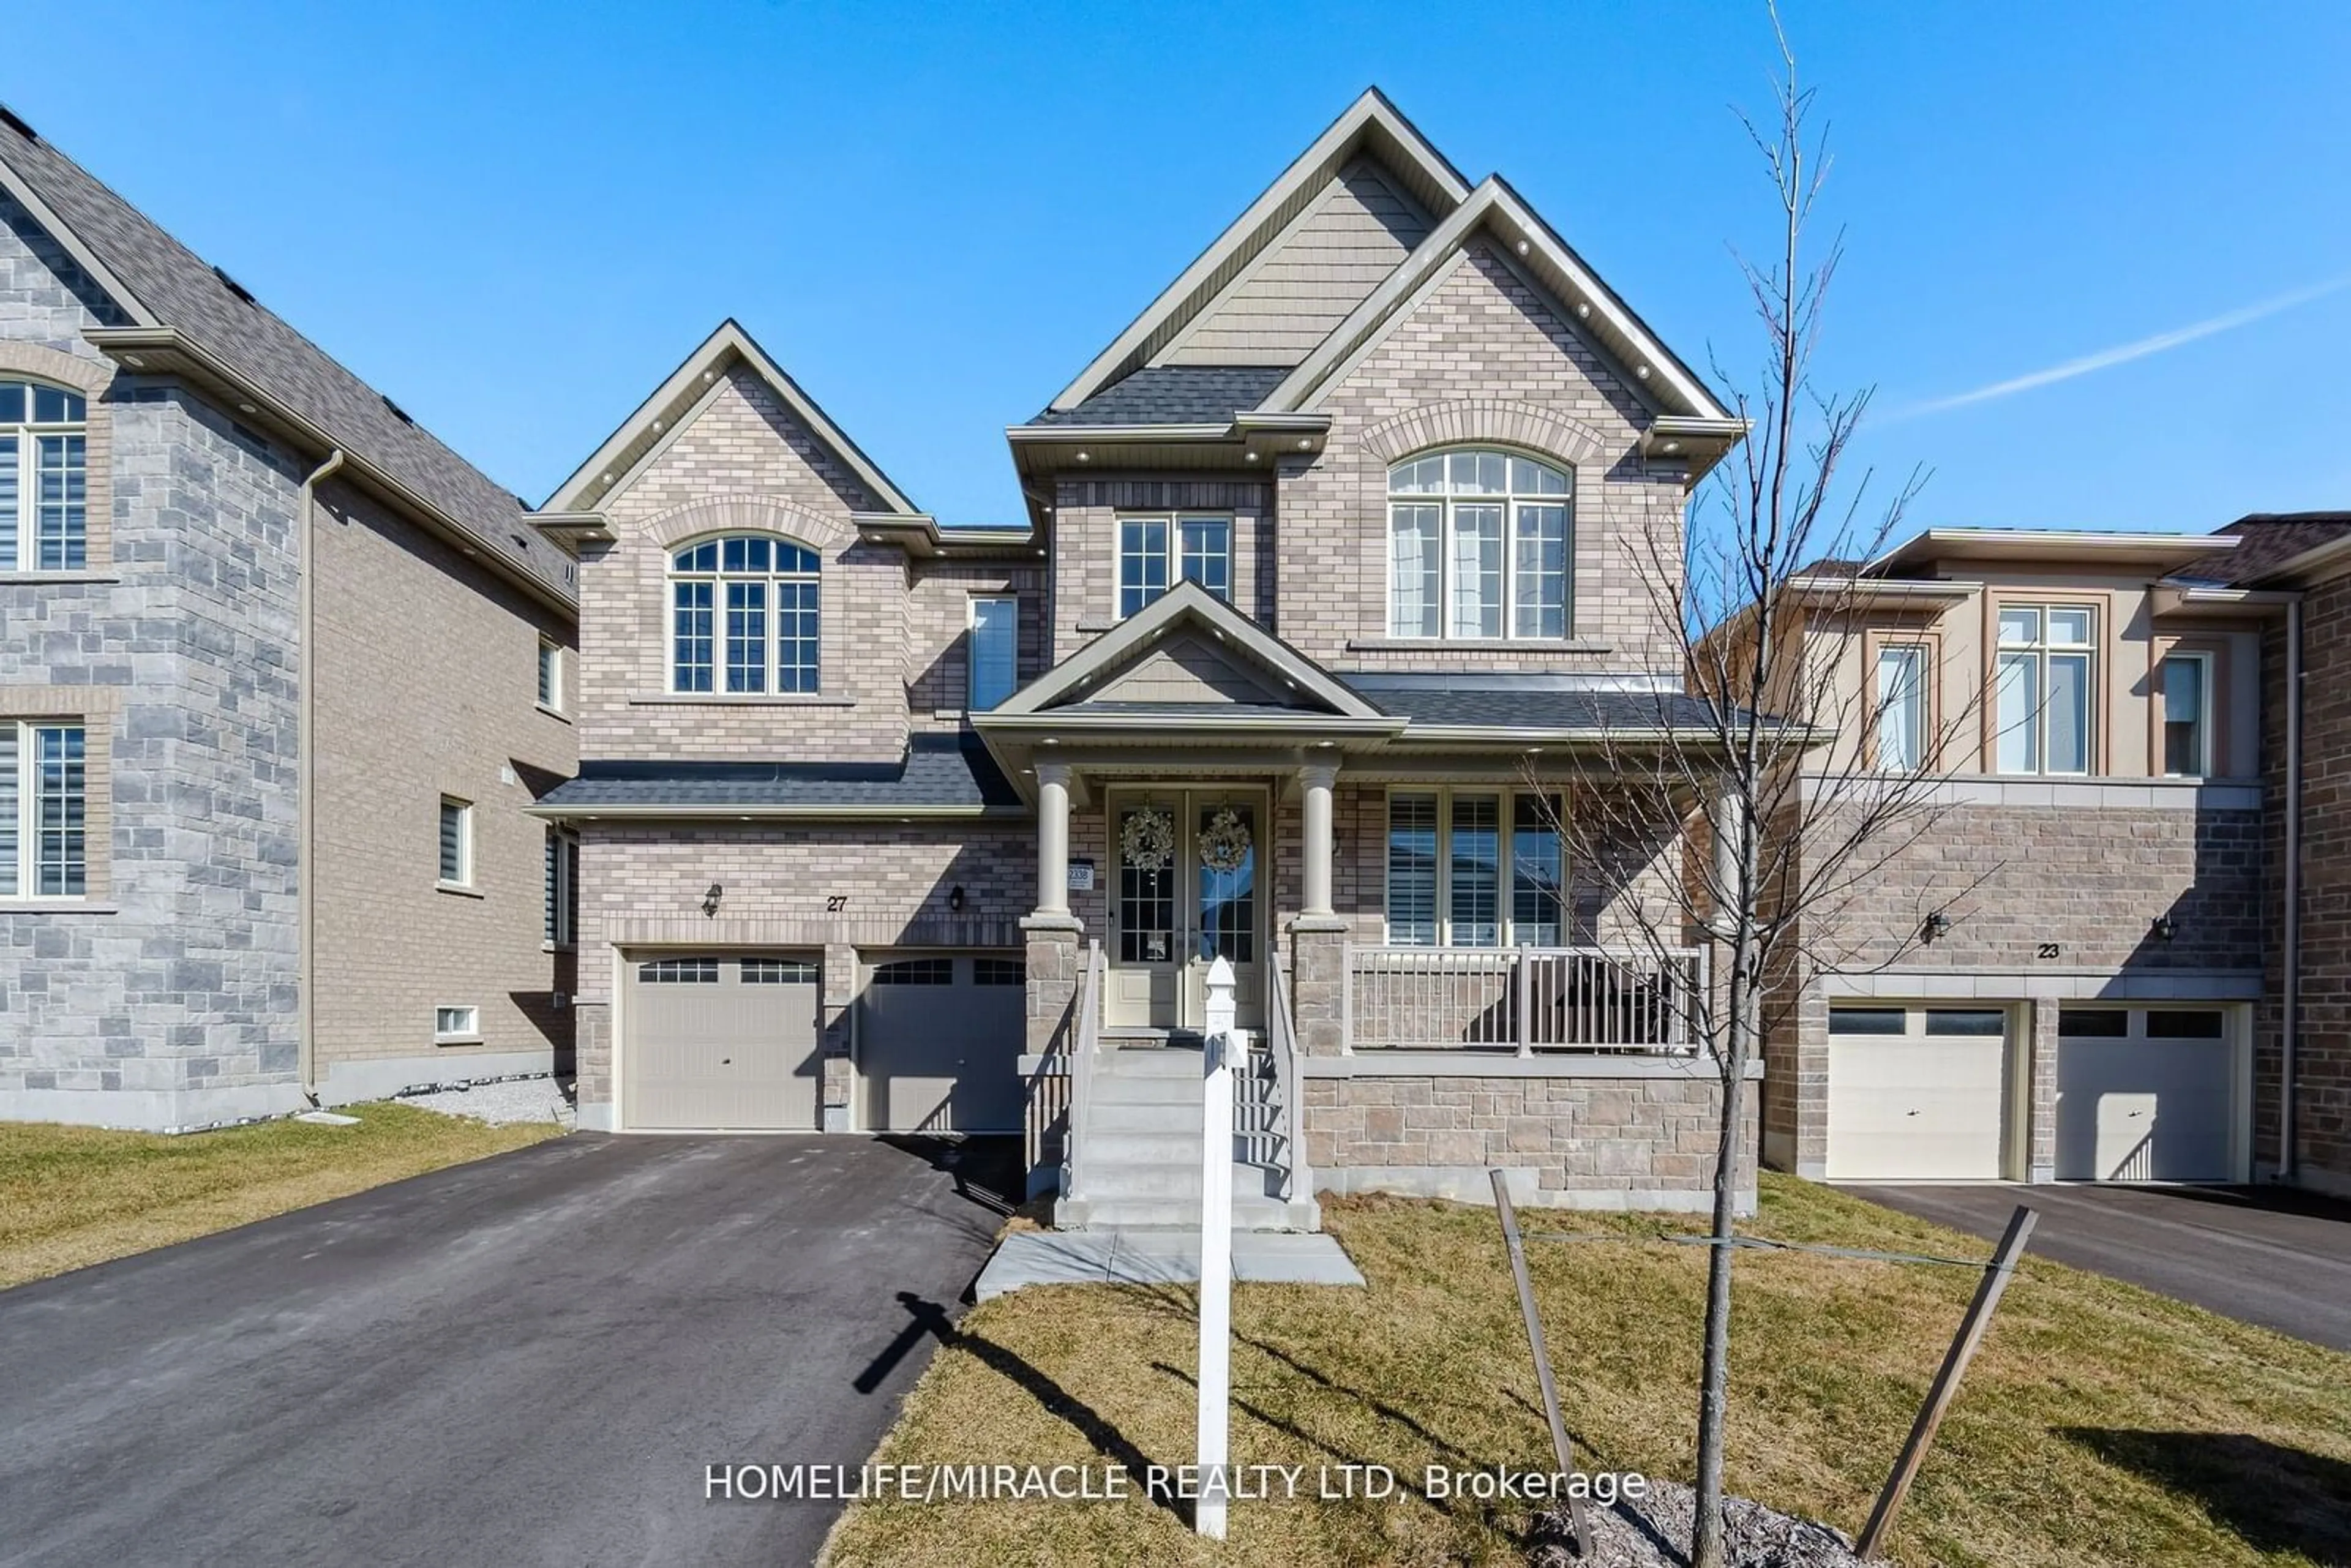 Frontside or backside of a home for 27 Balsdon Hllw, East Gwillimbury Ontario L9N 0Y7